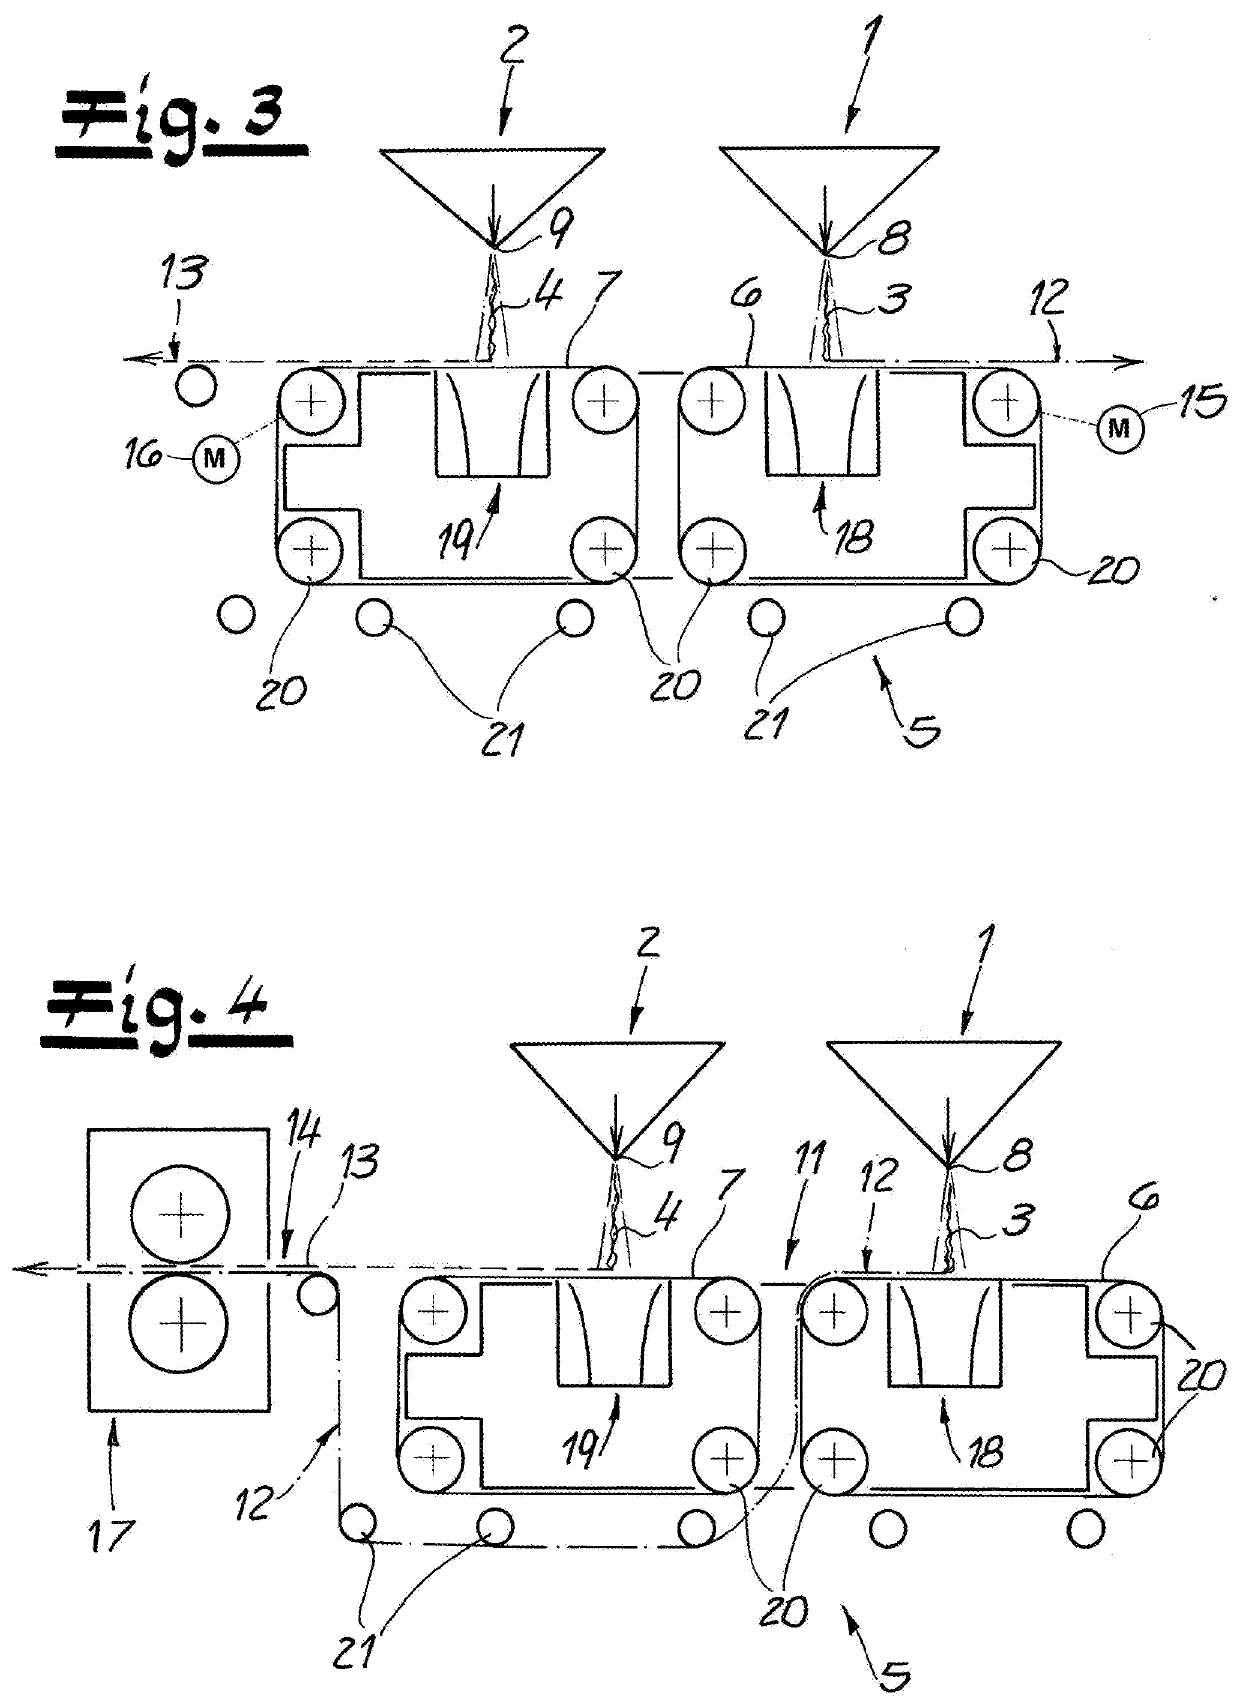 Apparatus for making melt-blown multilayer nonwoven